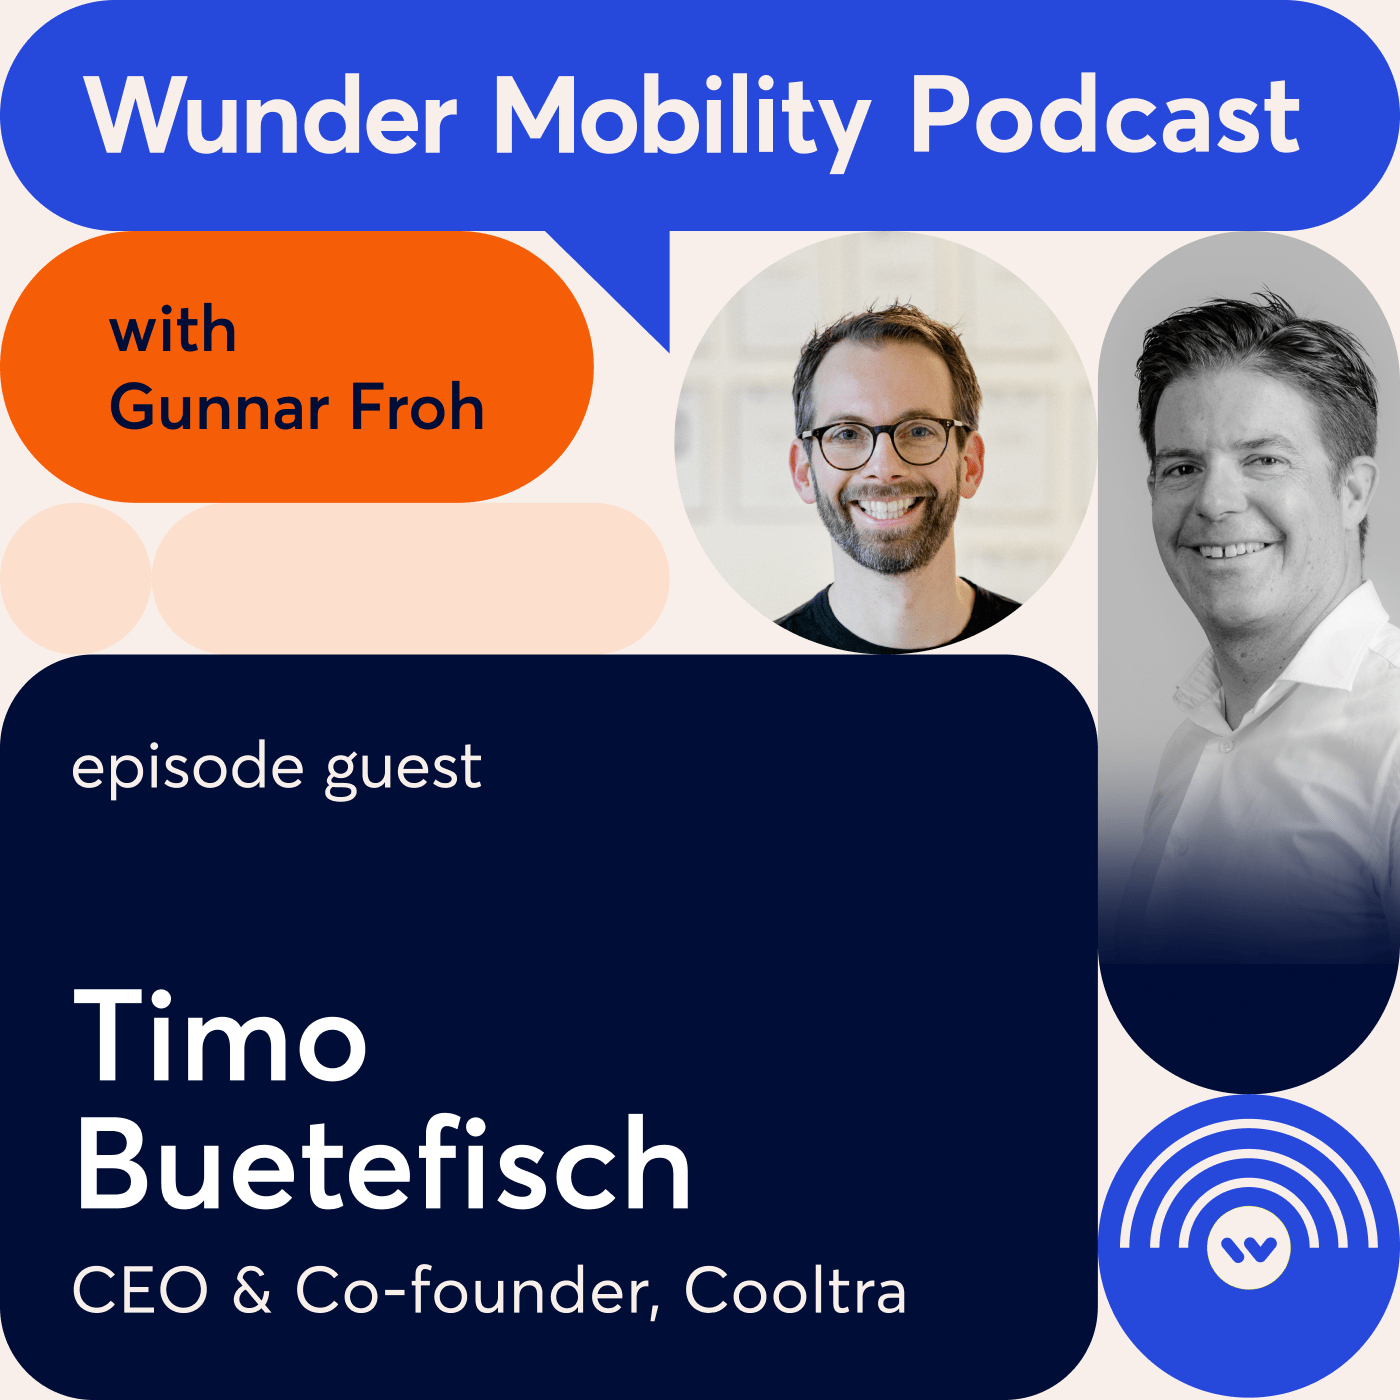 #19 Timo Buetefisch, Co-founder & CEO, Cooltra